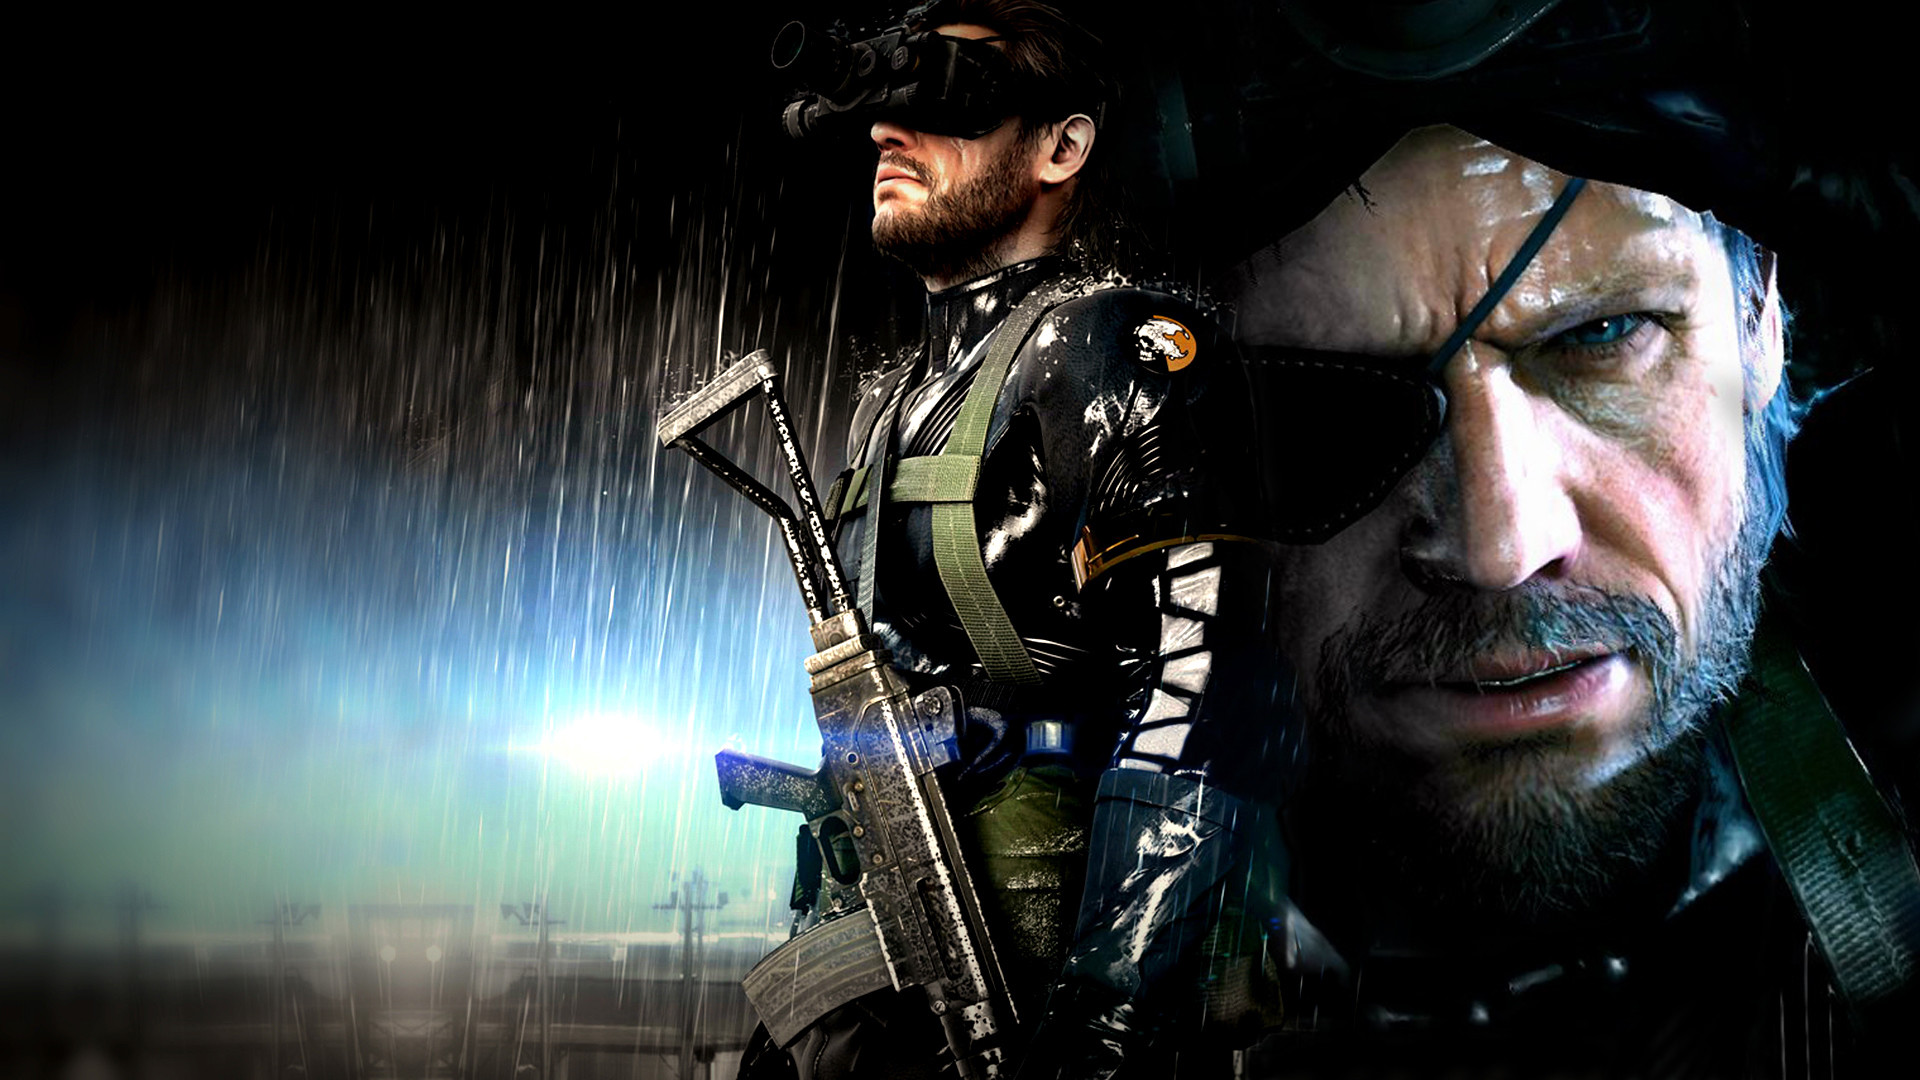 1920x1080 Metal Gear Solid V: The Phantom Pain images